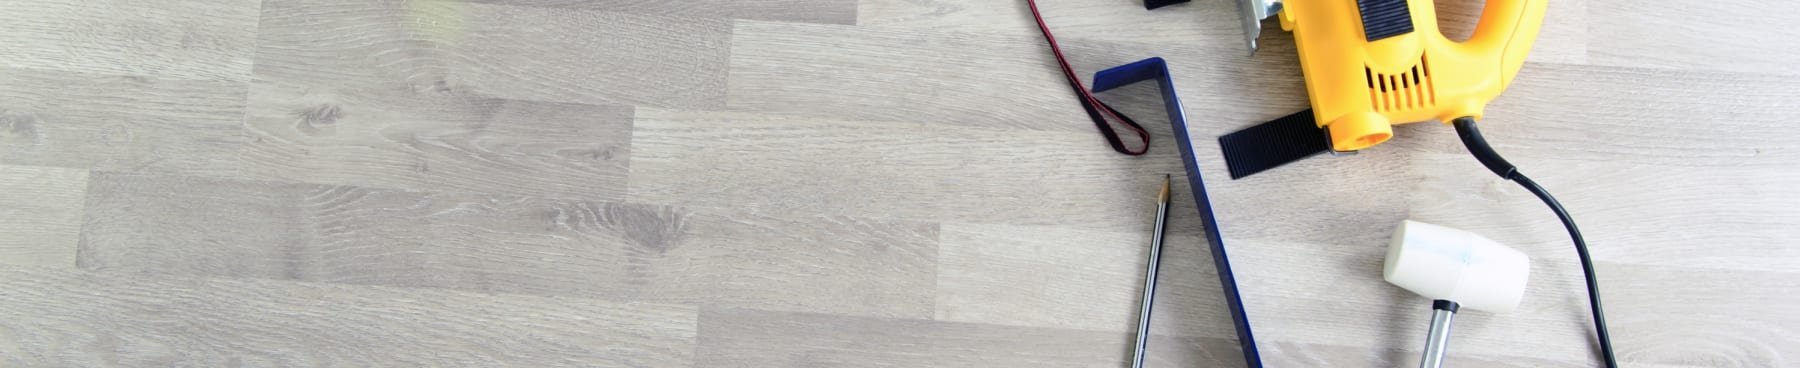 Learn more about the Flooring installation services offered by Absolute Floor Covering in Western Michigan area